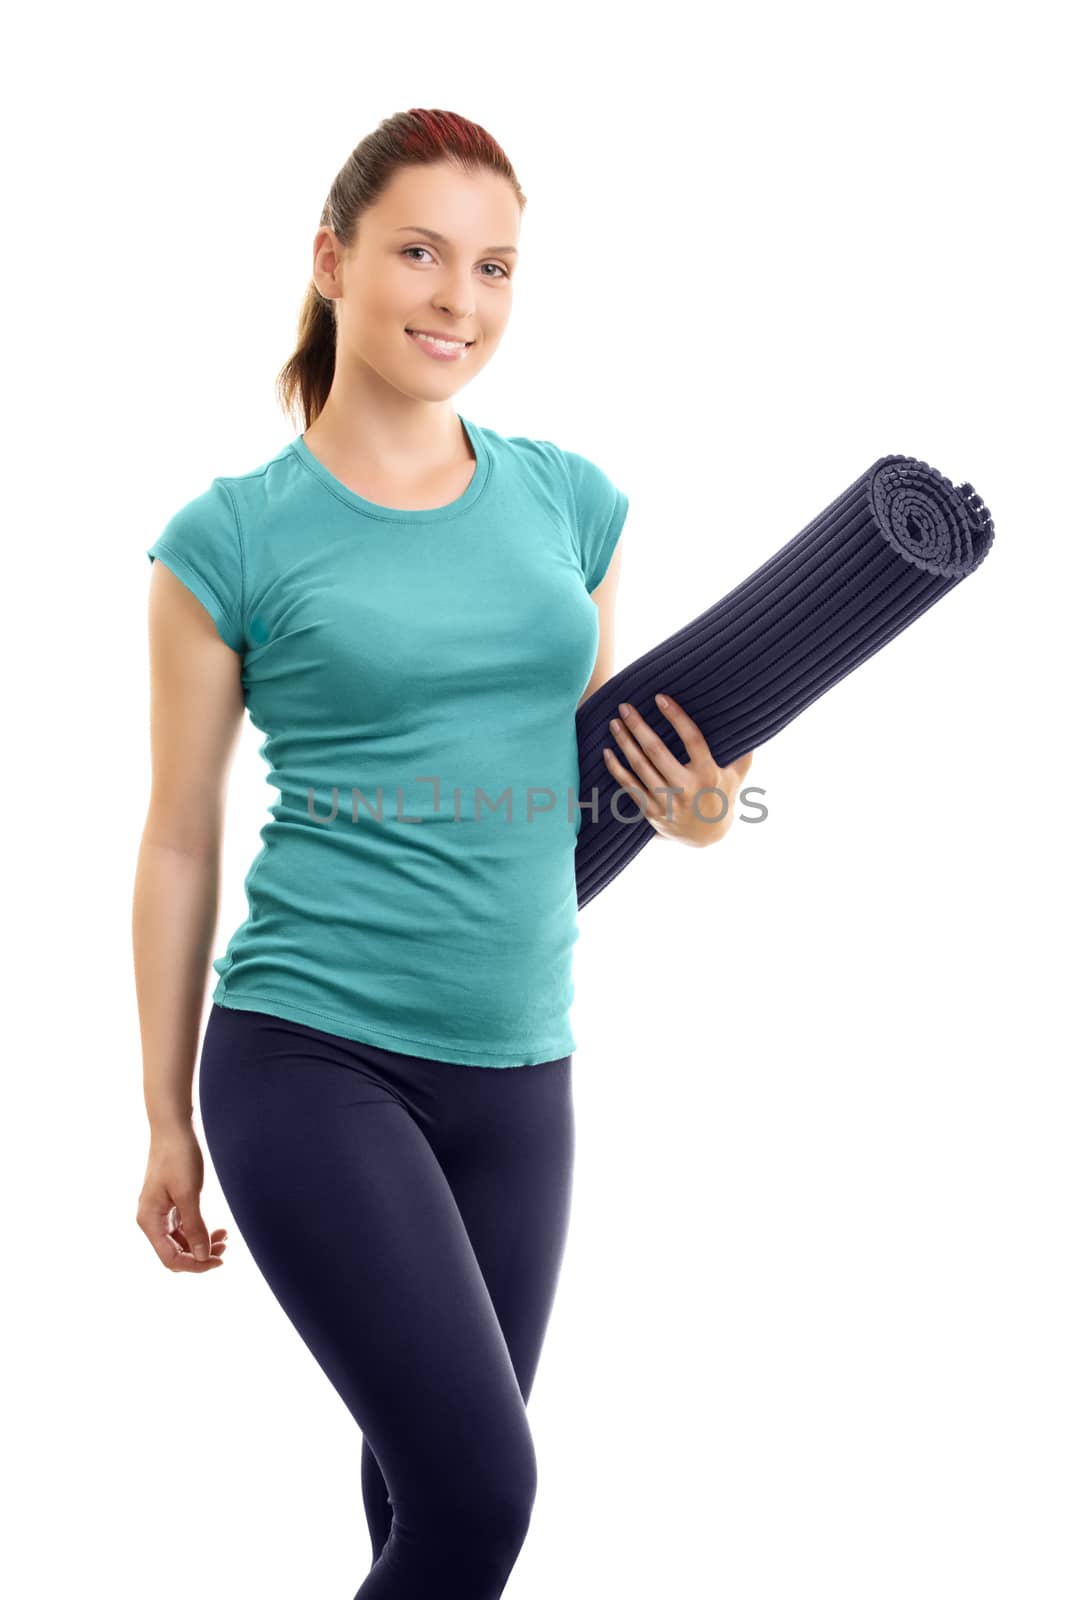 Beautiful fit girl holding a workout mat by Mendelex